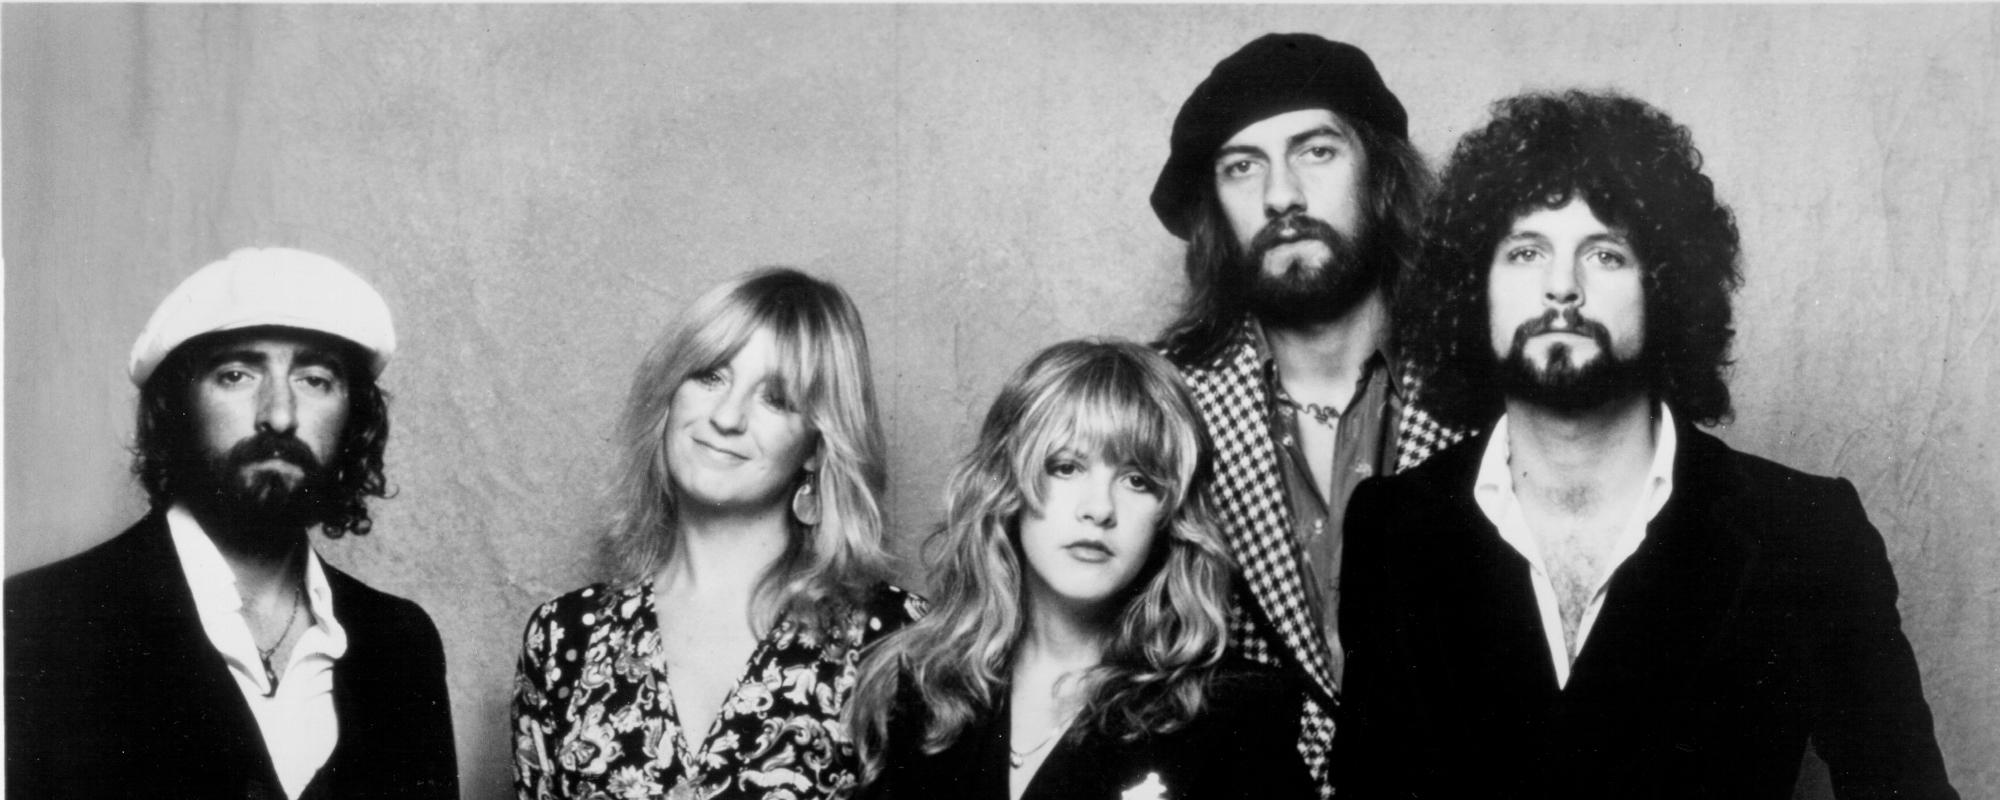 Divorces, drugs, clashes: The real story behind Fleetwood Mac's 'The Chain'